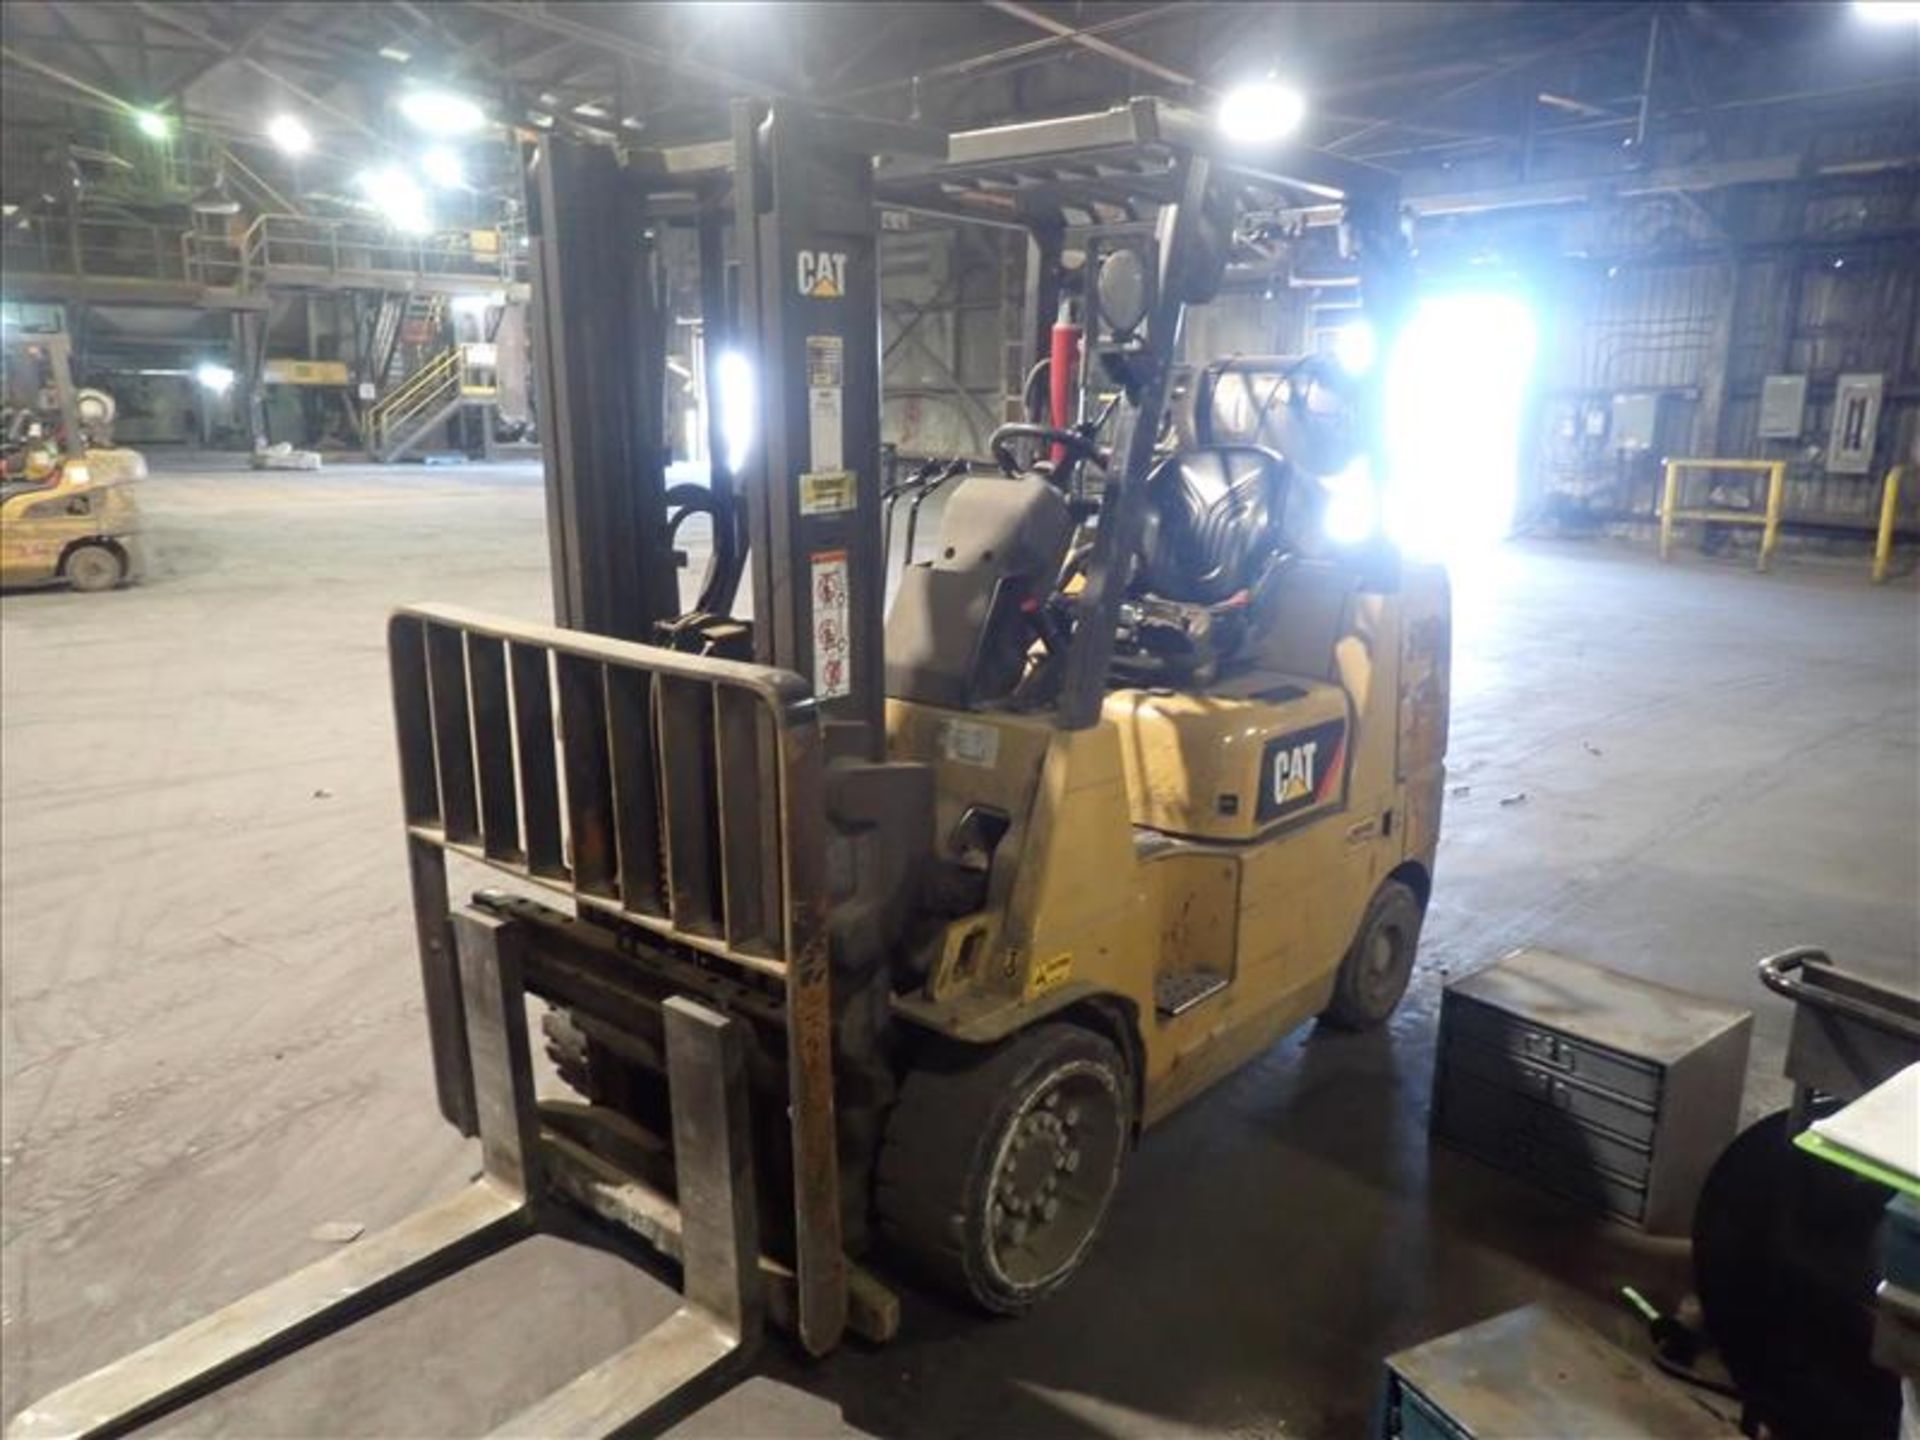 CAT forklift truck, mod. GC35K, ser. no. AT87B11292, 7000 lbs cap., propane, 2-stage mast, hour